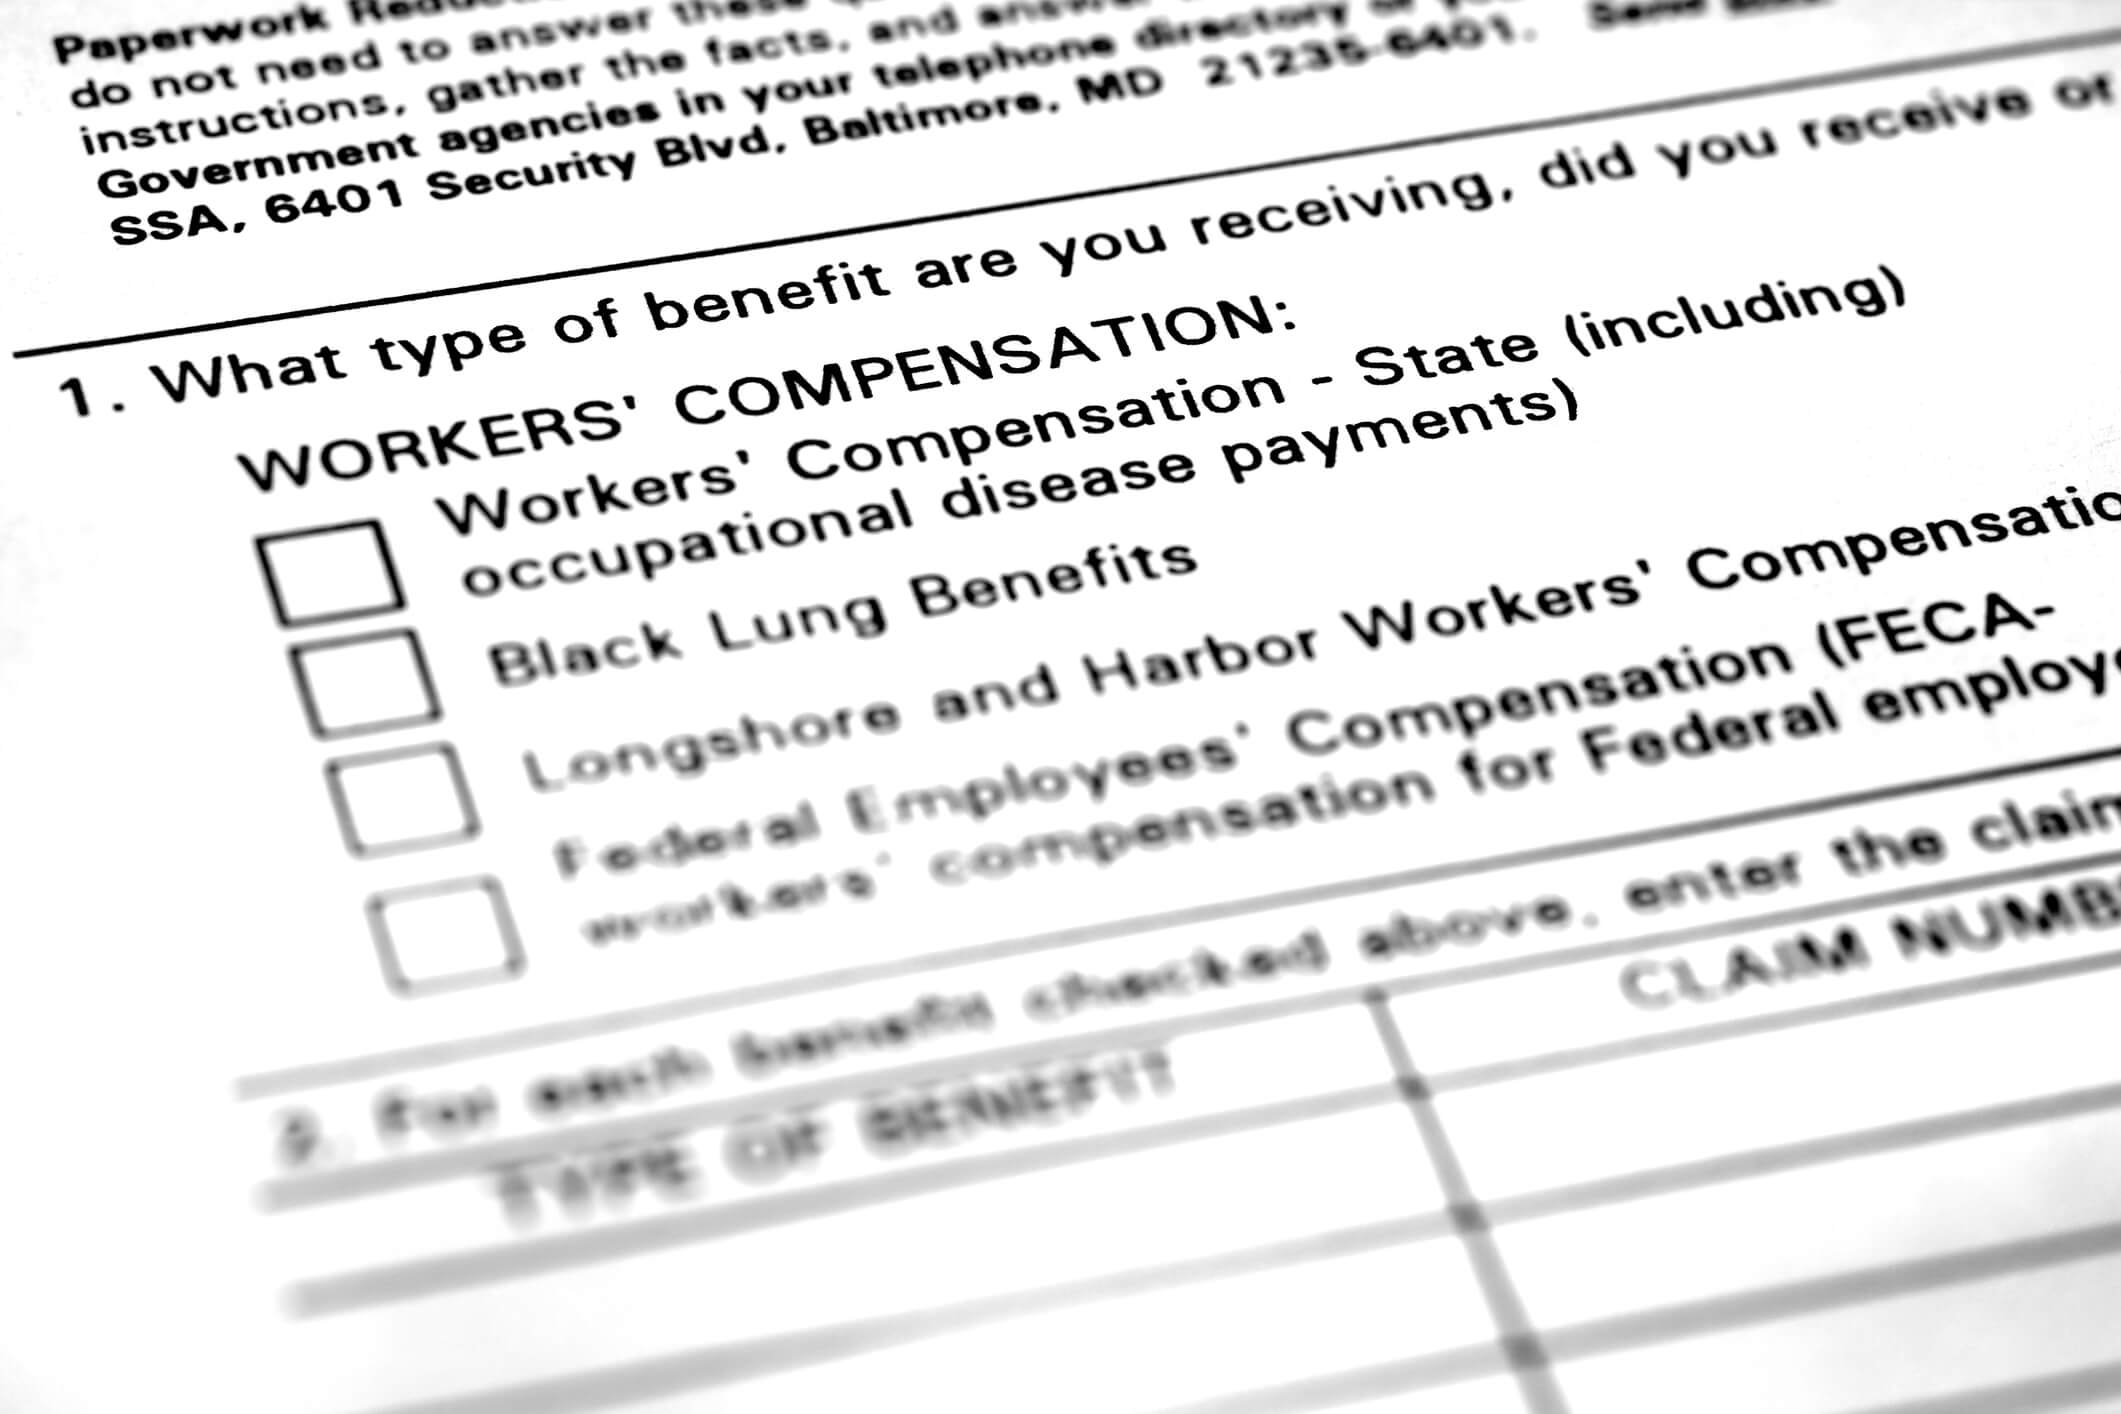 Image of a form with a checkbox for black lung benefits, representing attachment of black lung benefits in WV.